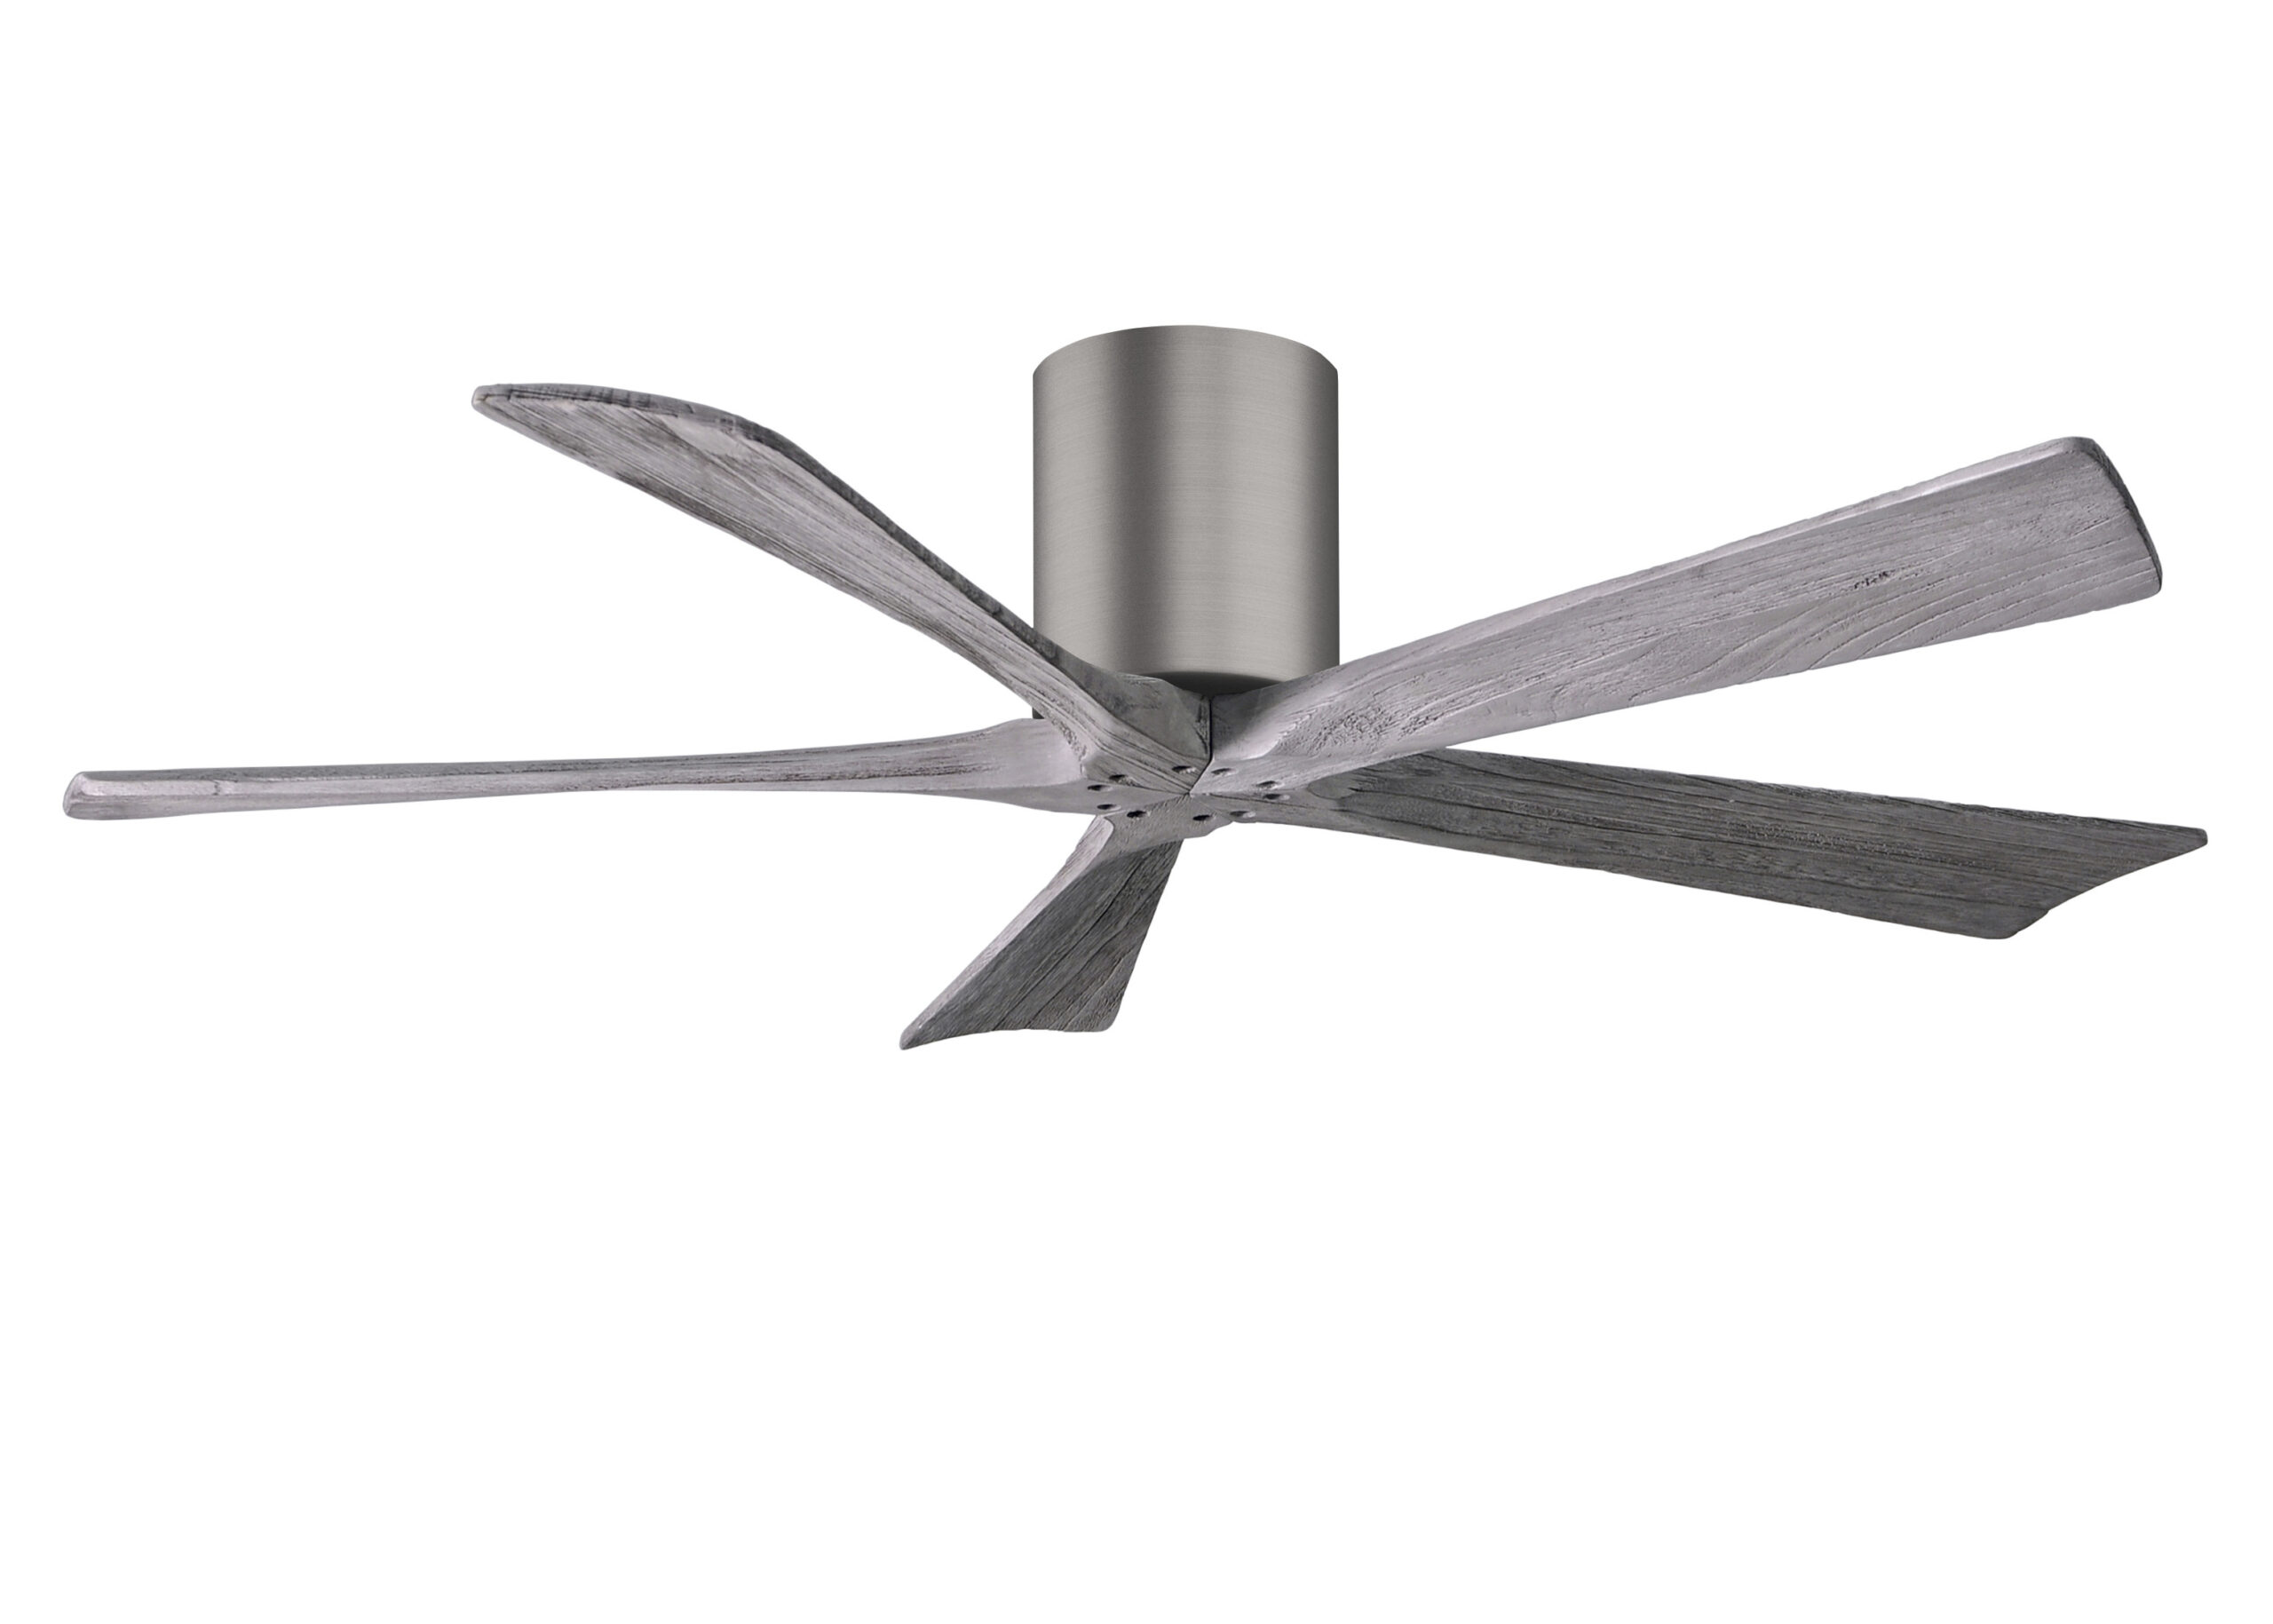 Irene-5H Ceiling Fan in Brushed Pewter Finish with 52